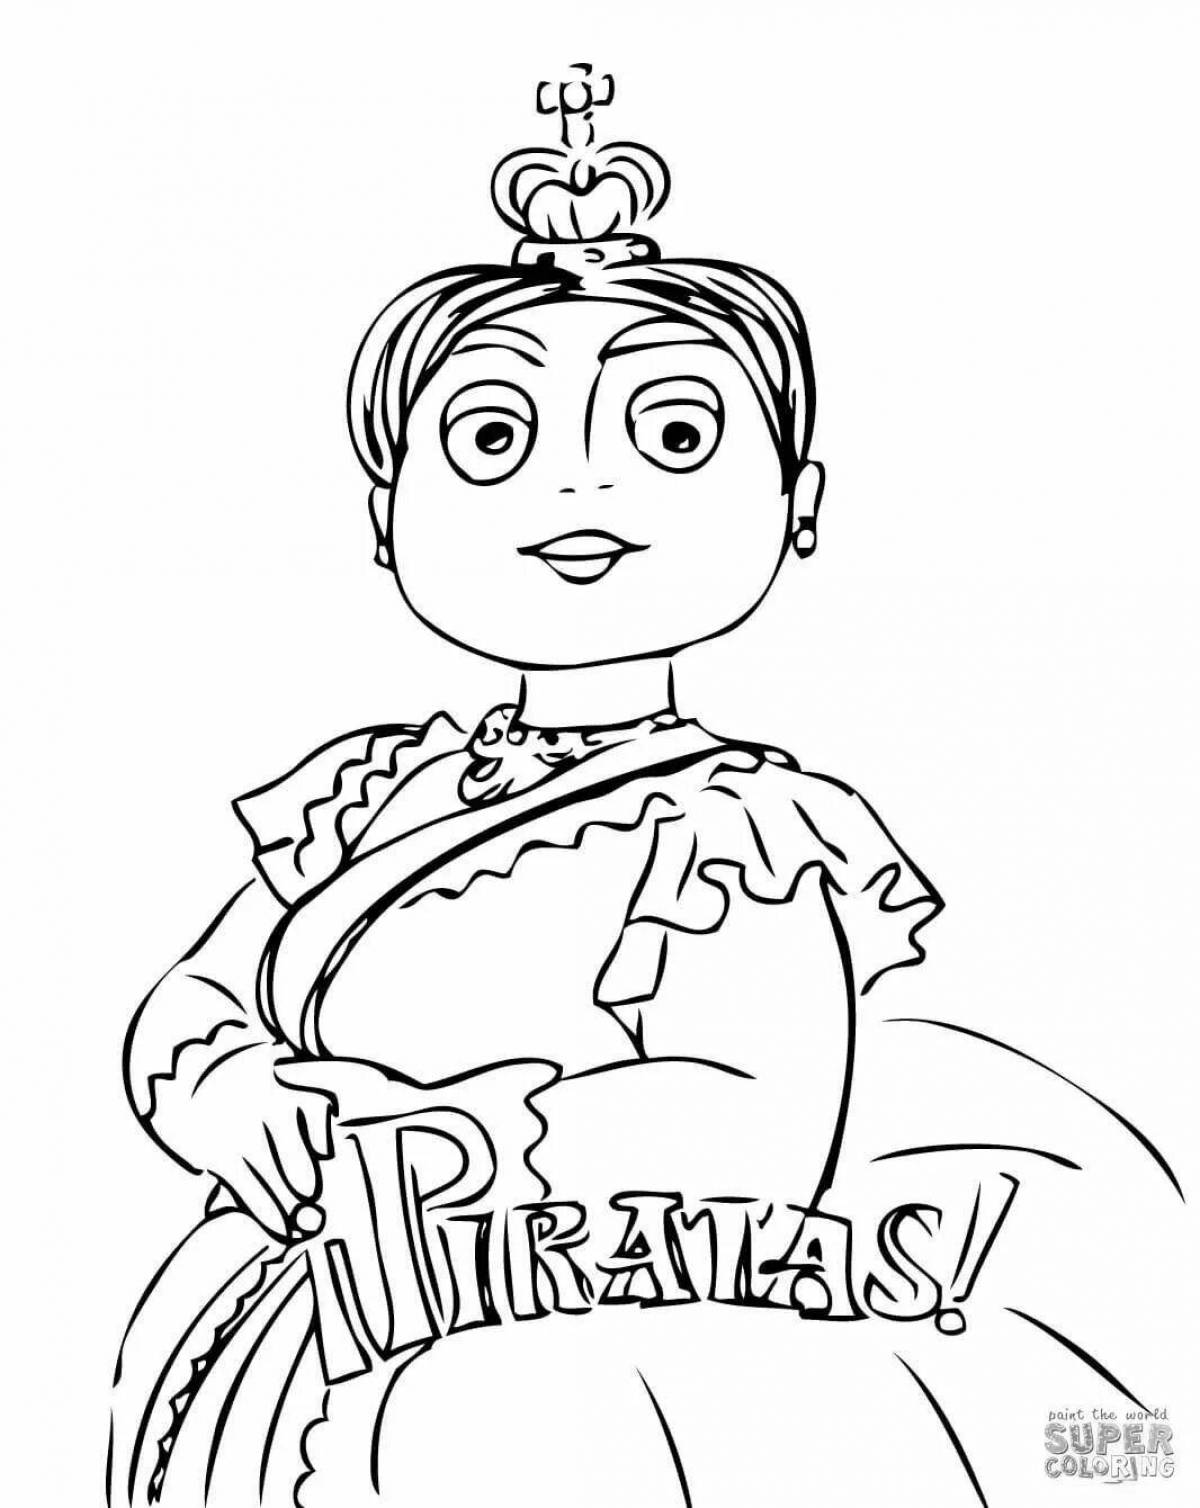 Victoria shining coloring page